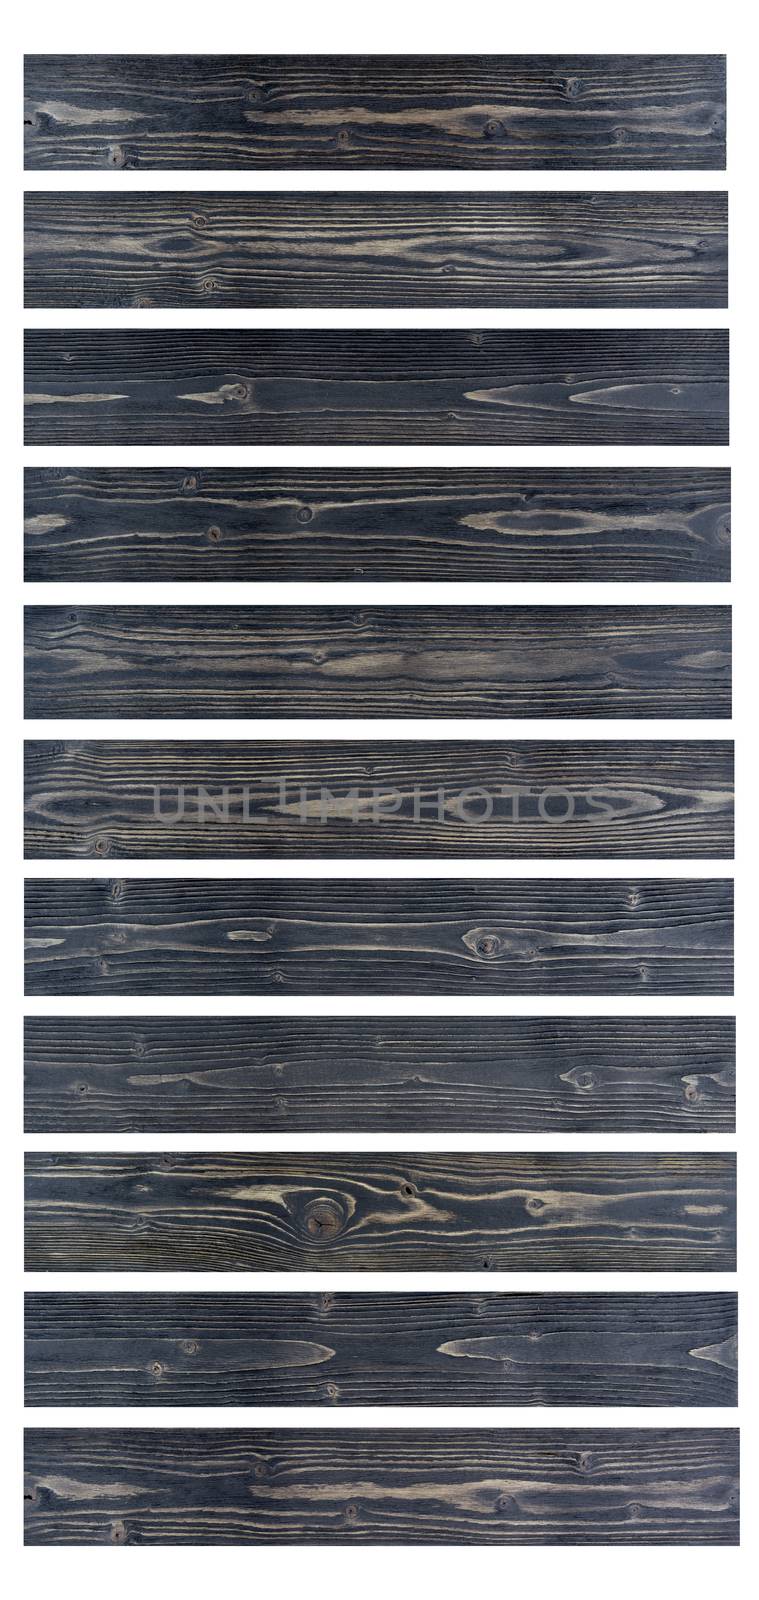 Grunge wood table background. Sunface wooden plank black texture background isolated on white background.